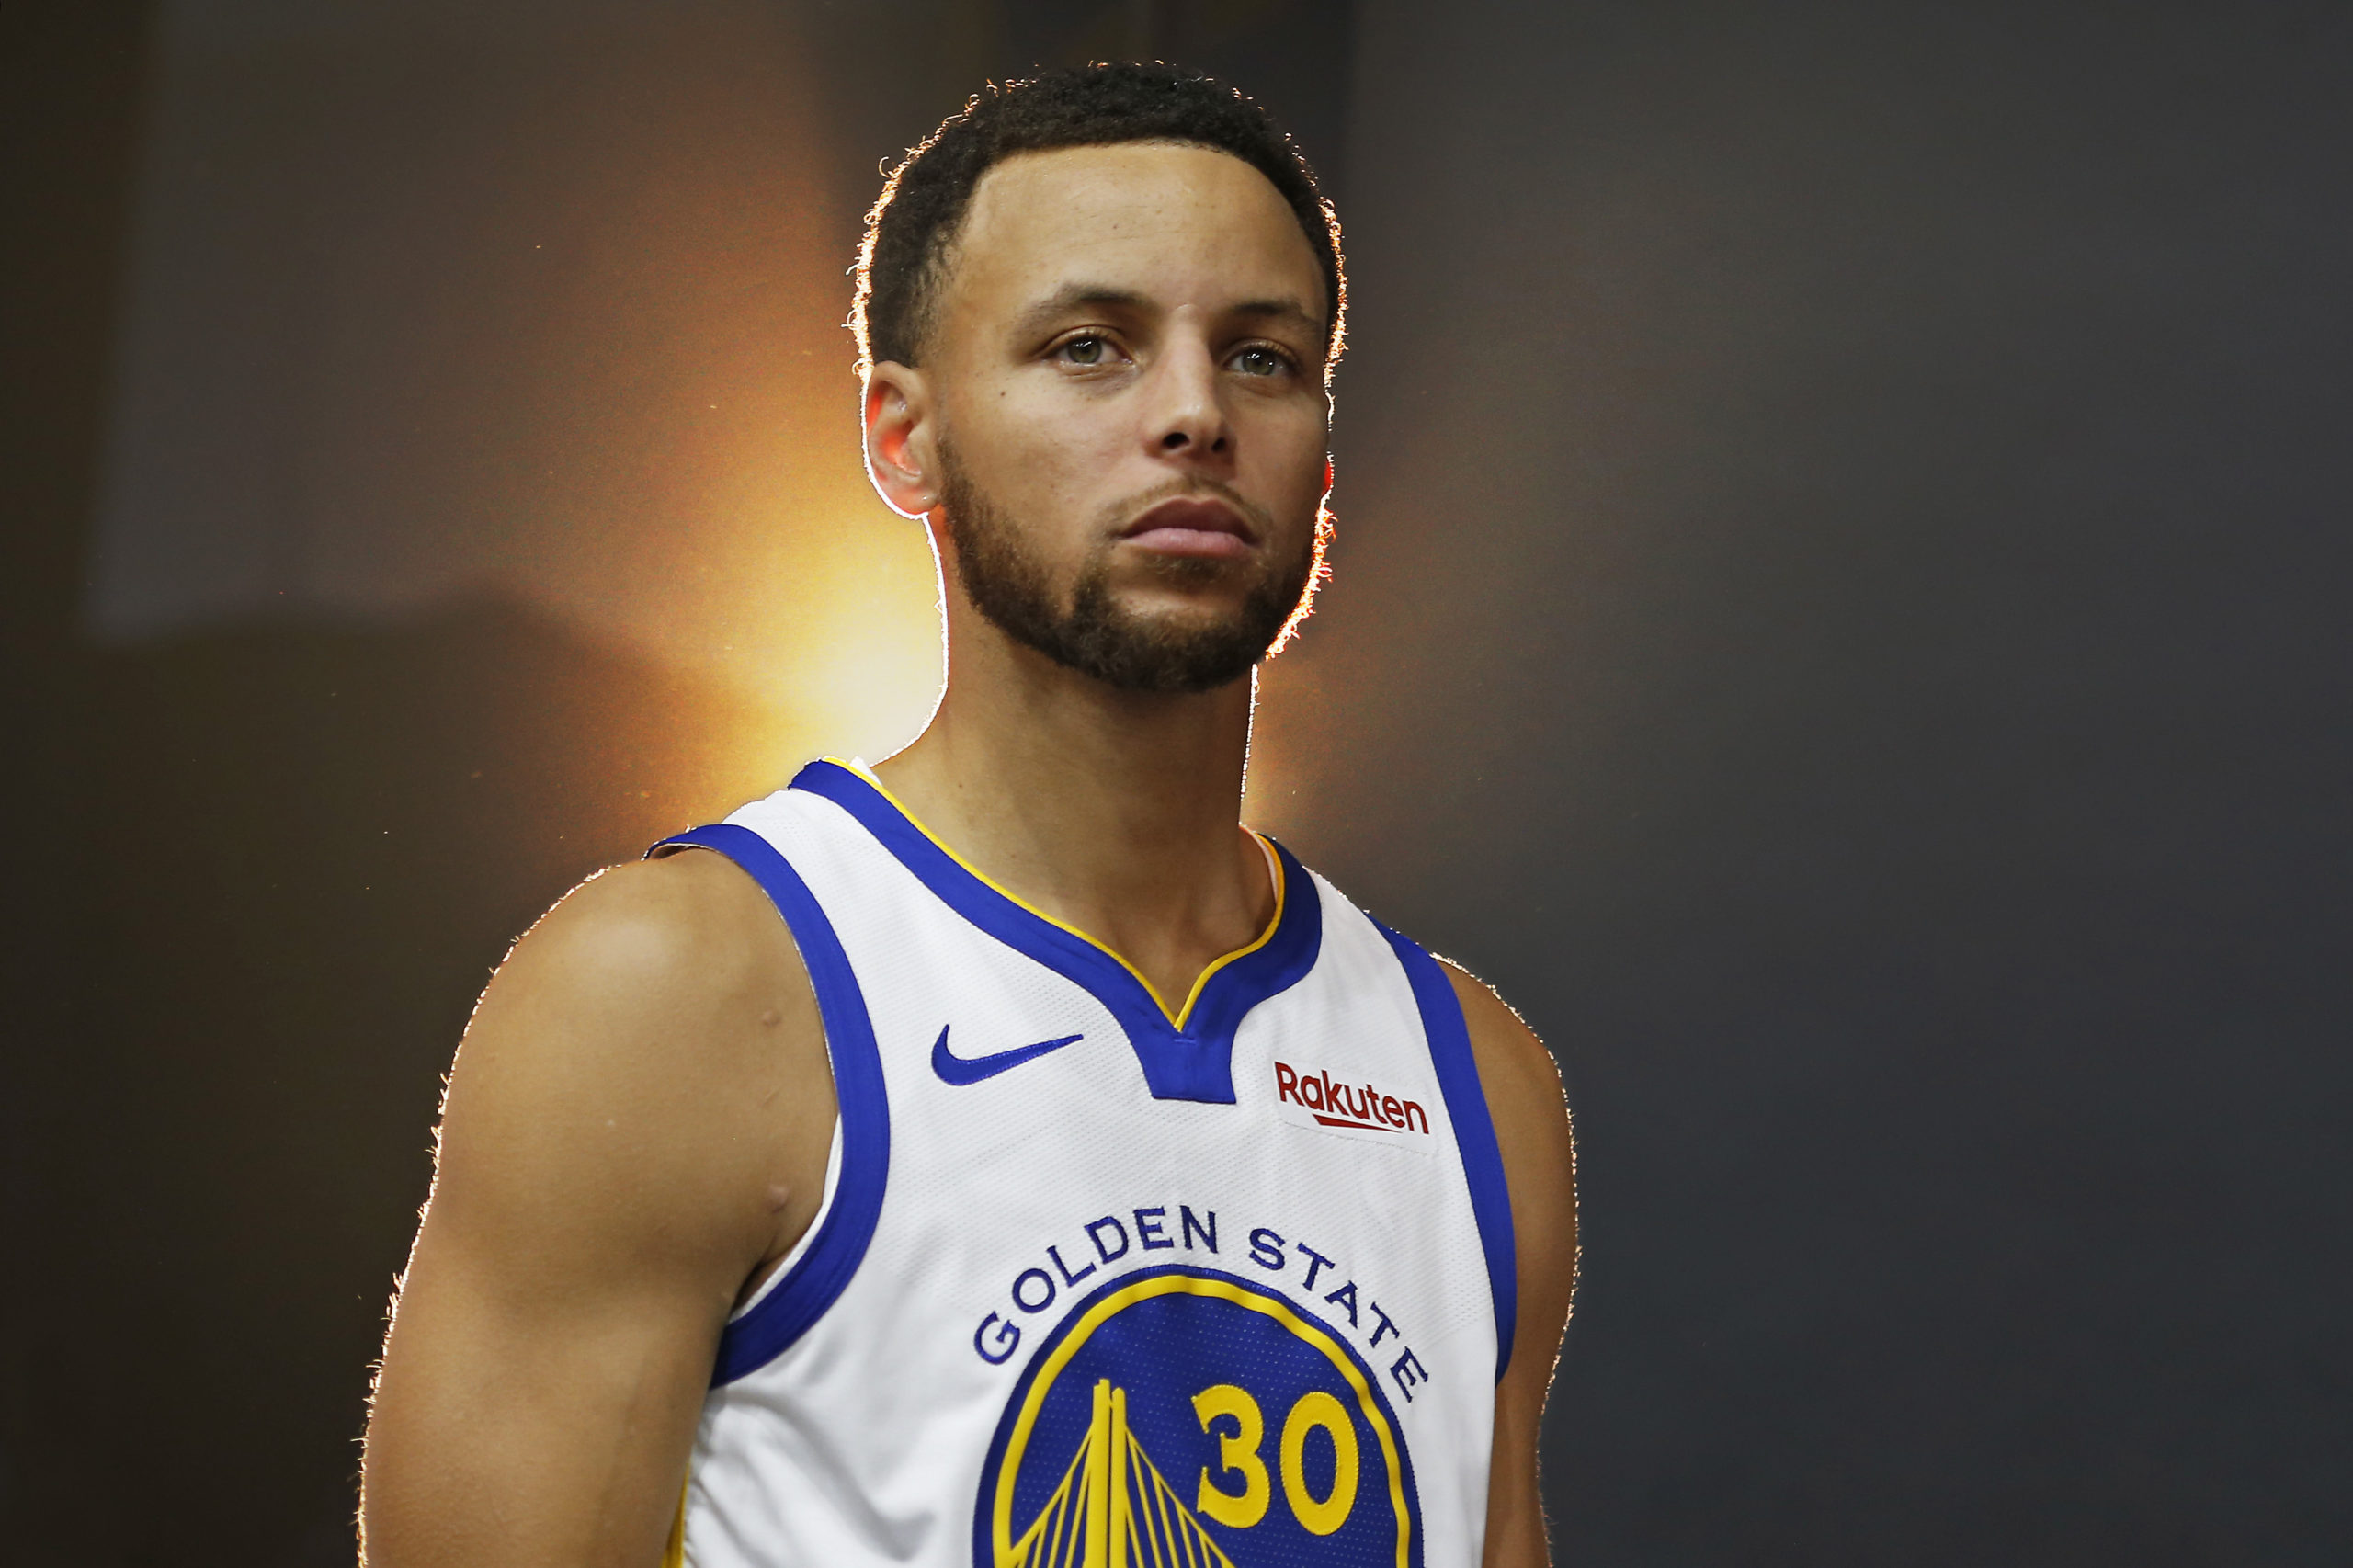 Warriors News: Stephen Curry named to All-NBA Second Team - Golden